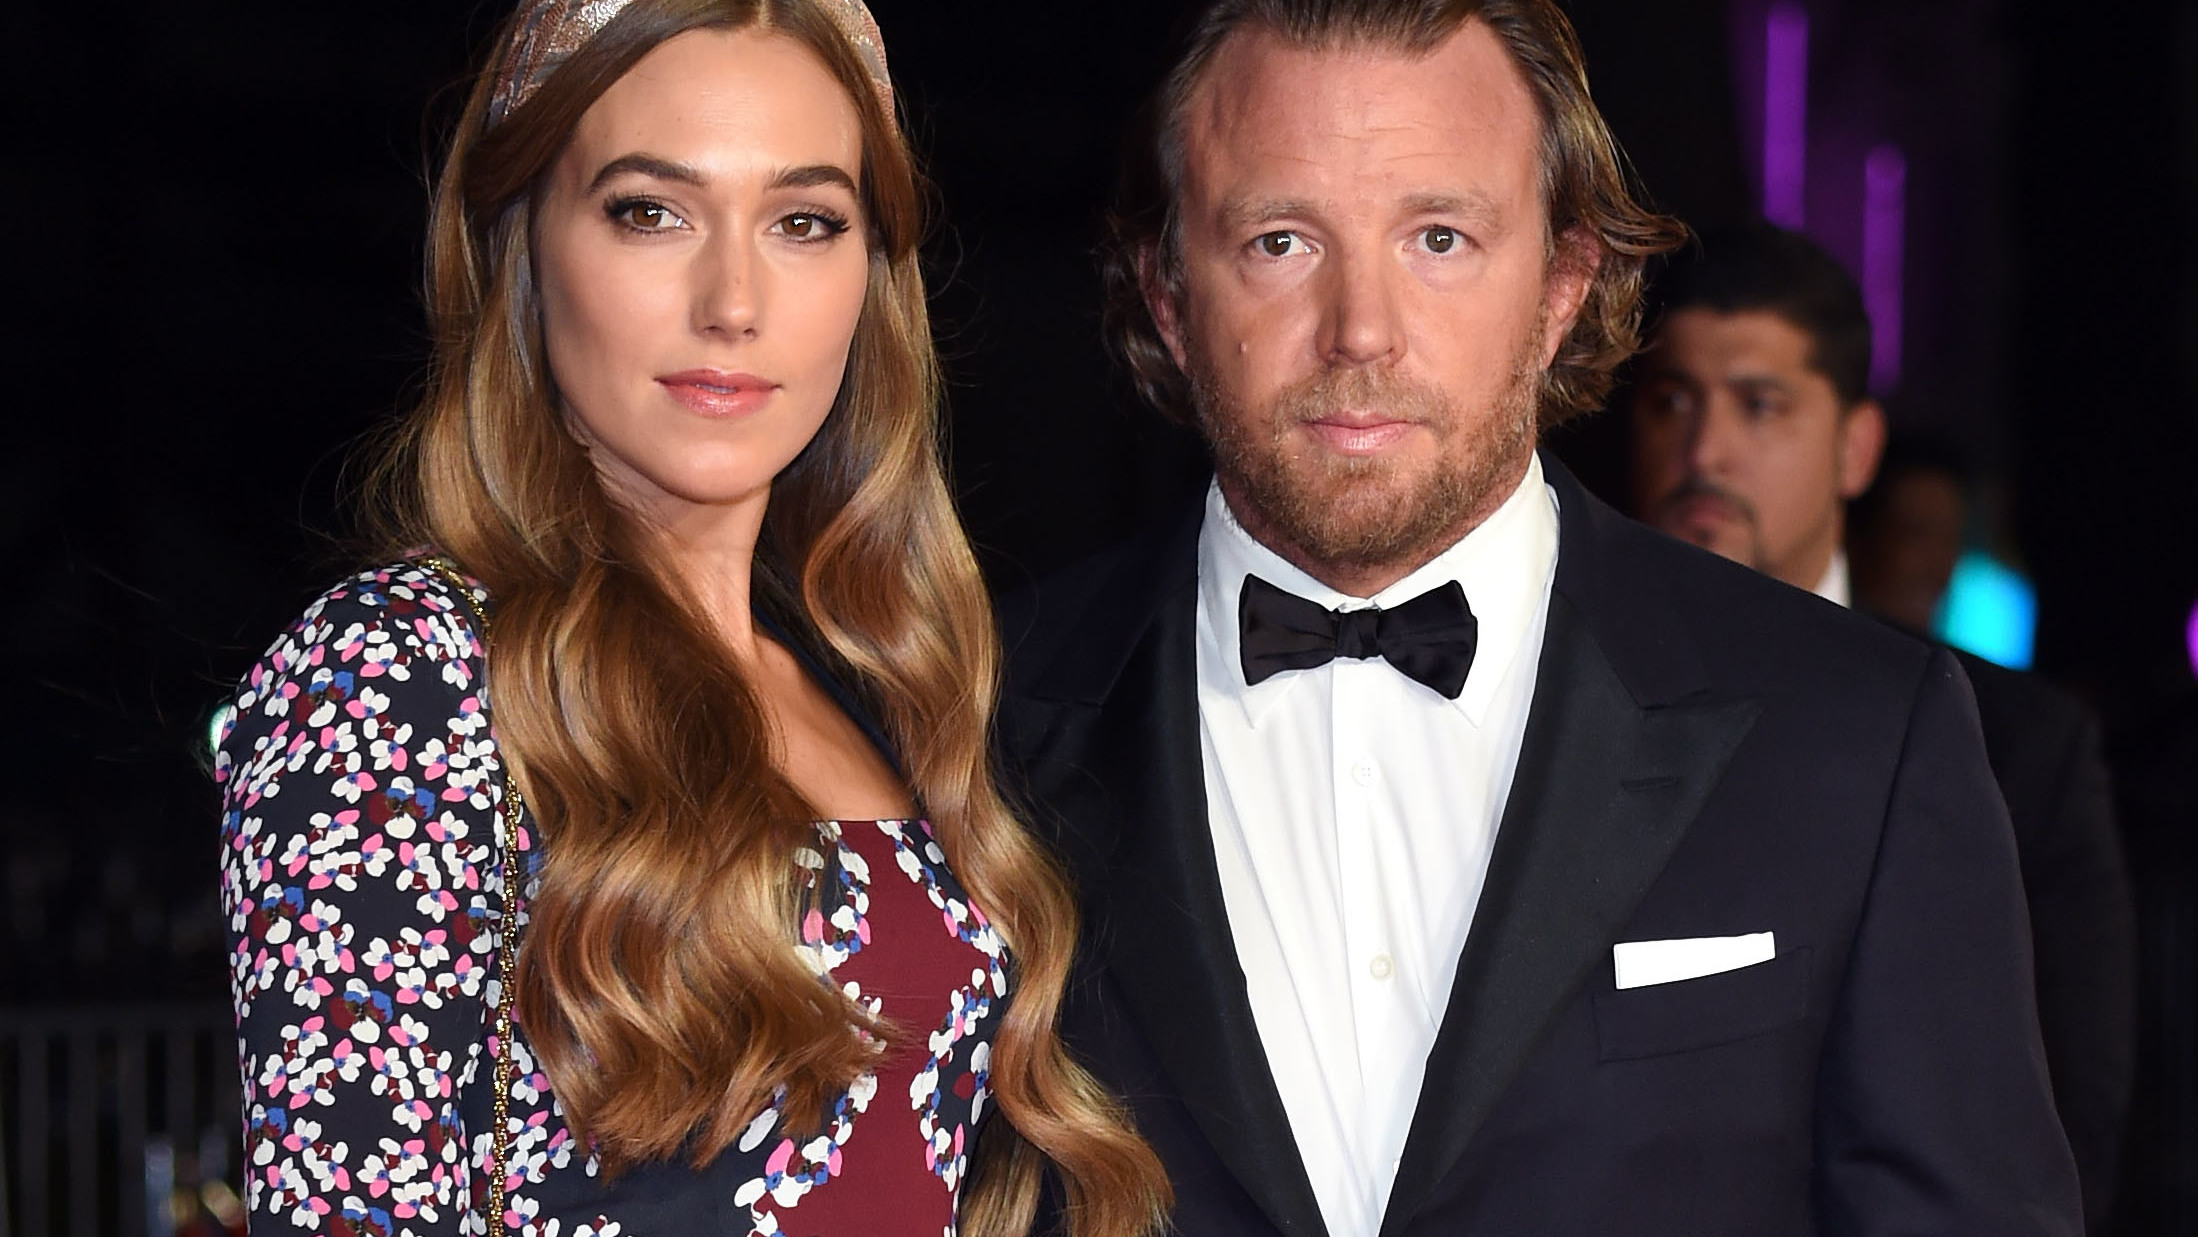 Guy Ritchie getrouwd met Jacqui Ainsley